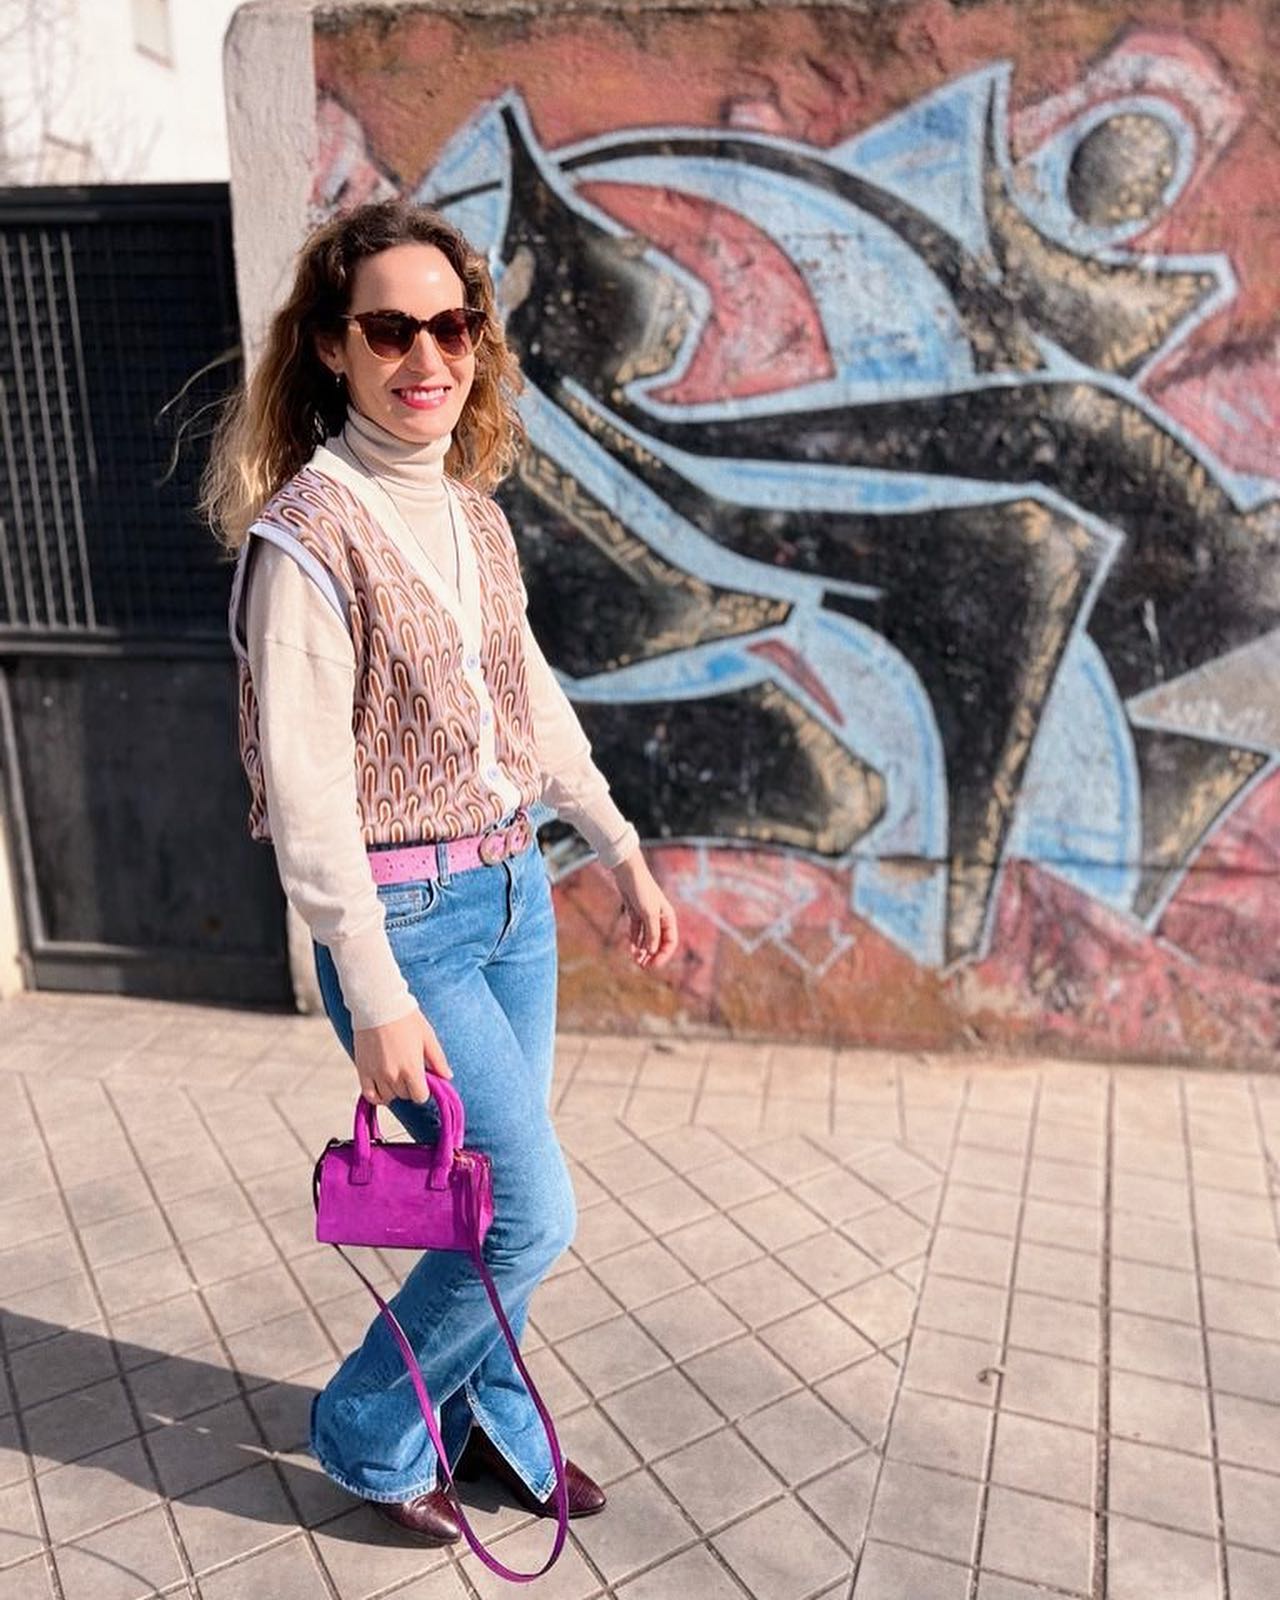 Pair shades of pink with a magenta purse